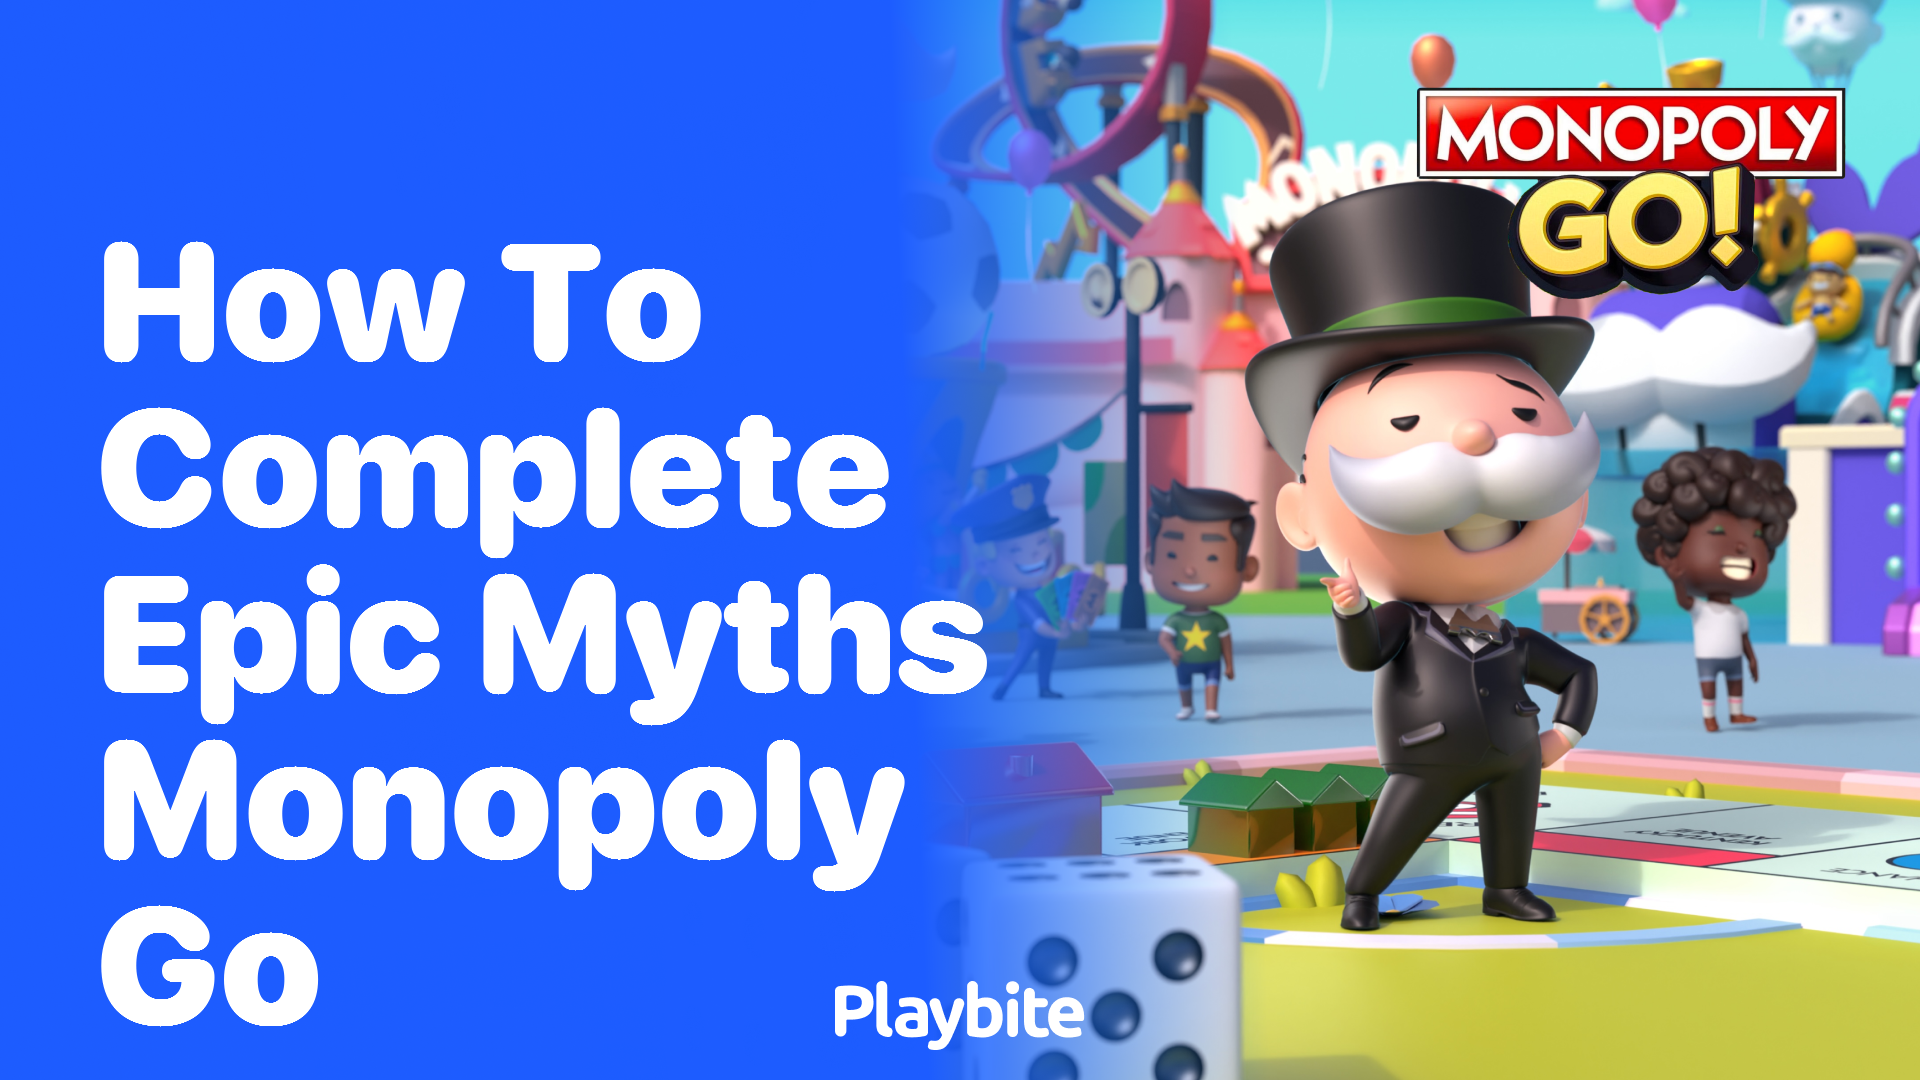 How to Complete Epic Myths in Monopoly Go